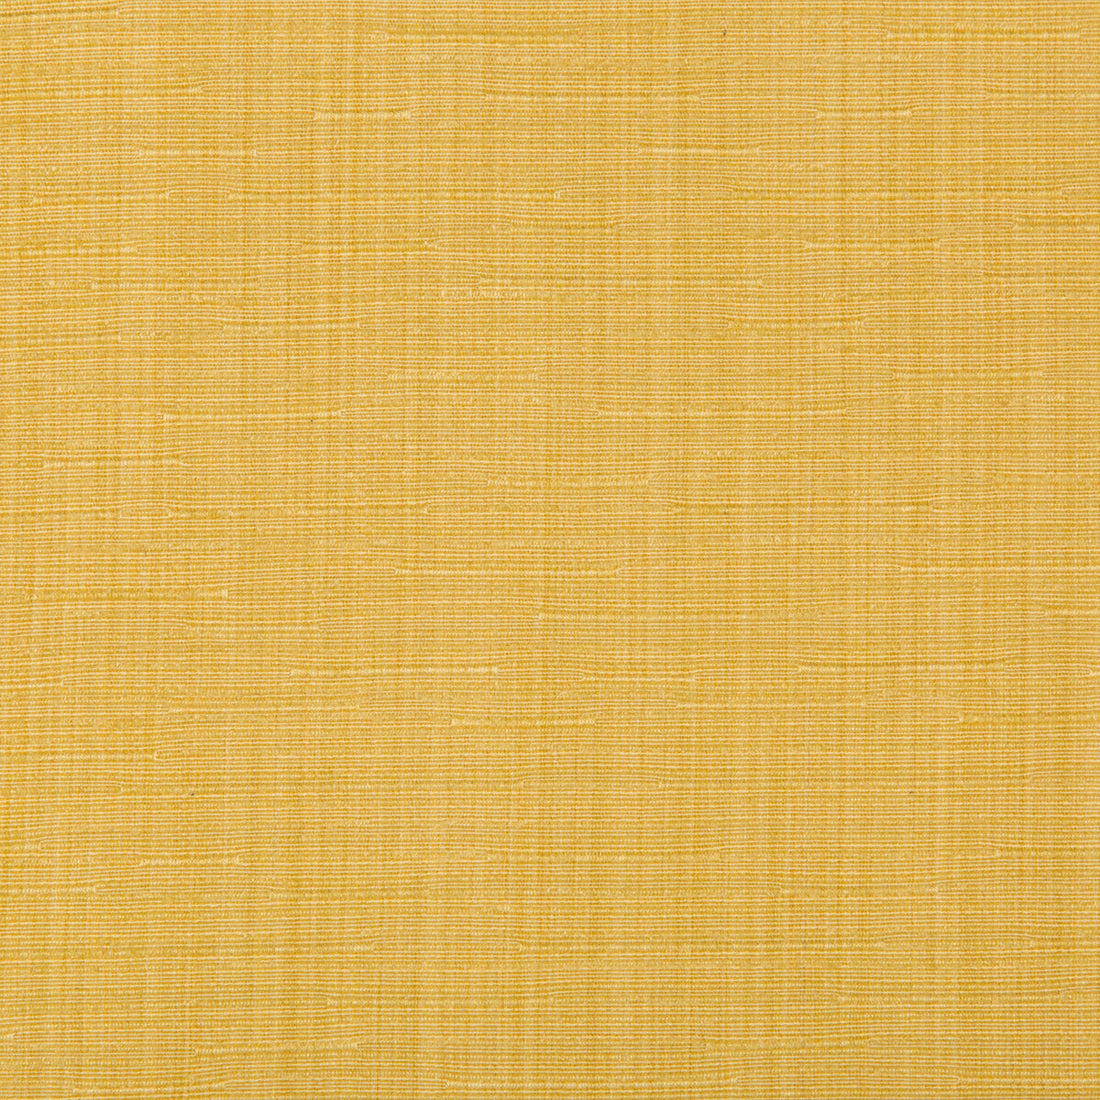 Somerset Strie fabric in maize color - pattern 2018150.40.0 - by Lee Jofa in the Somerset Strie collection